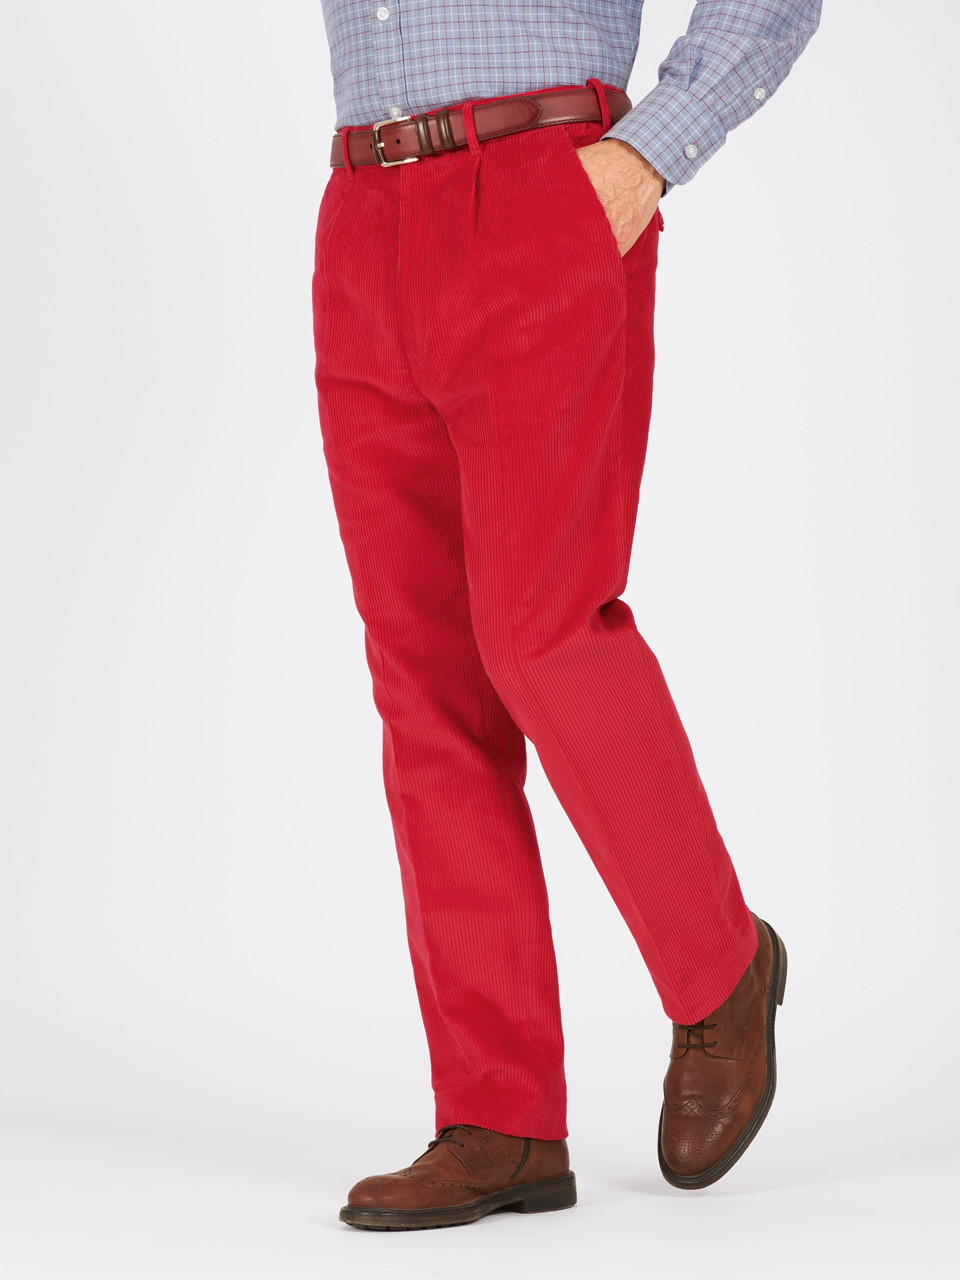 Deep Red Corduroy Trousers  Mens Country Clothing  Cordings EU